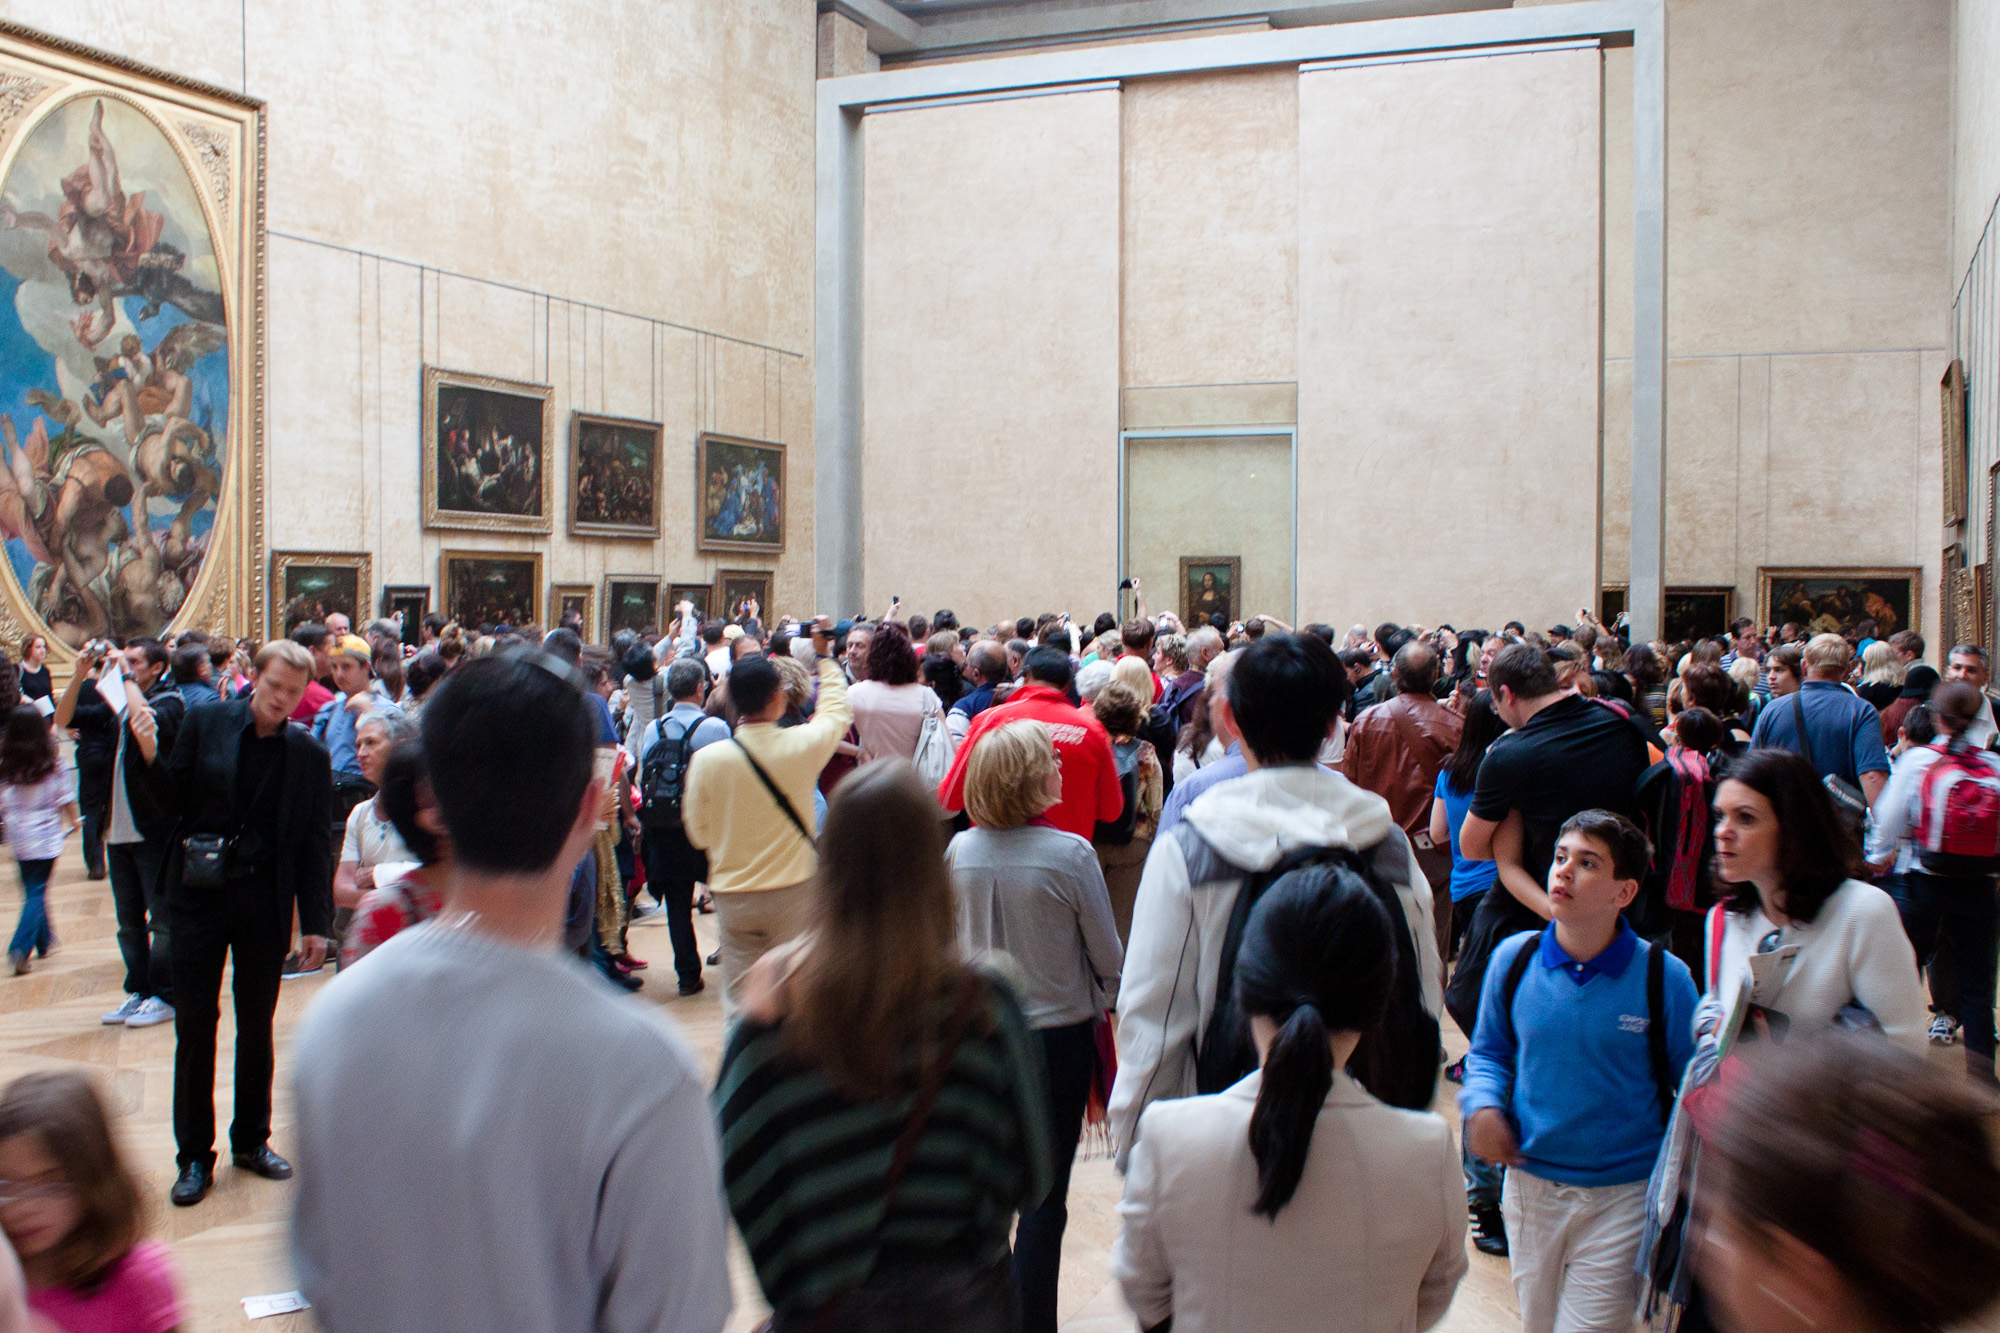 the crowd is gathered in a large room with paintings on the walls